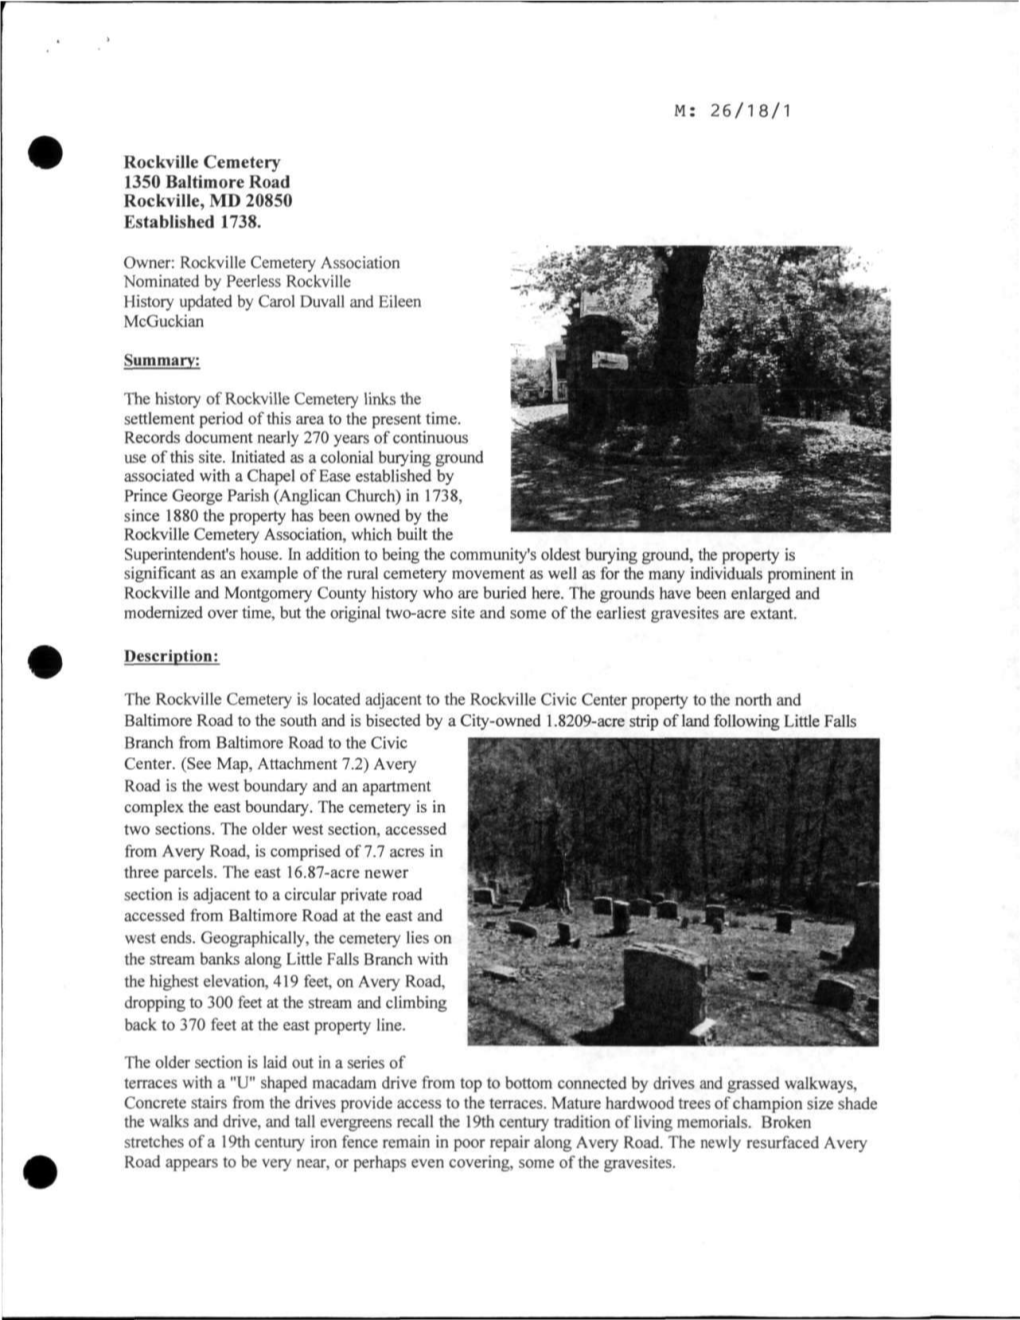 Rockville Cemetery Association Nominated by Peerless Rockville History Updated by Carol Duvall and Eileen Mcguckian